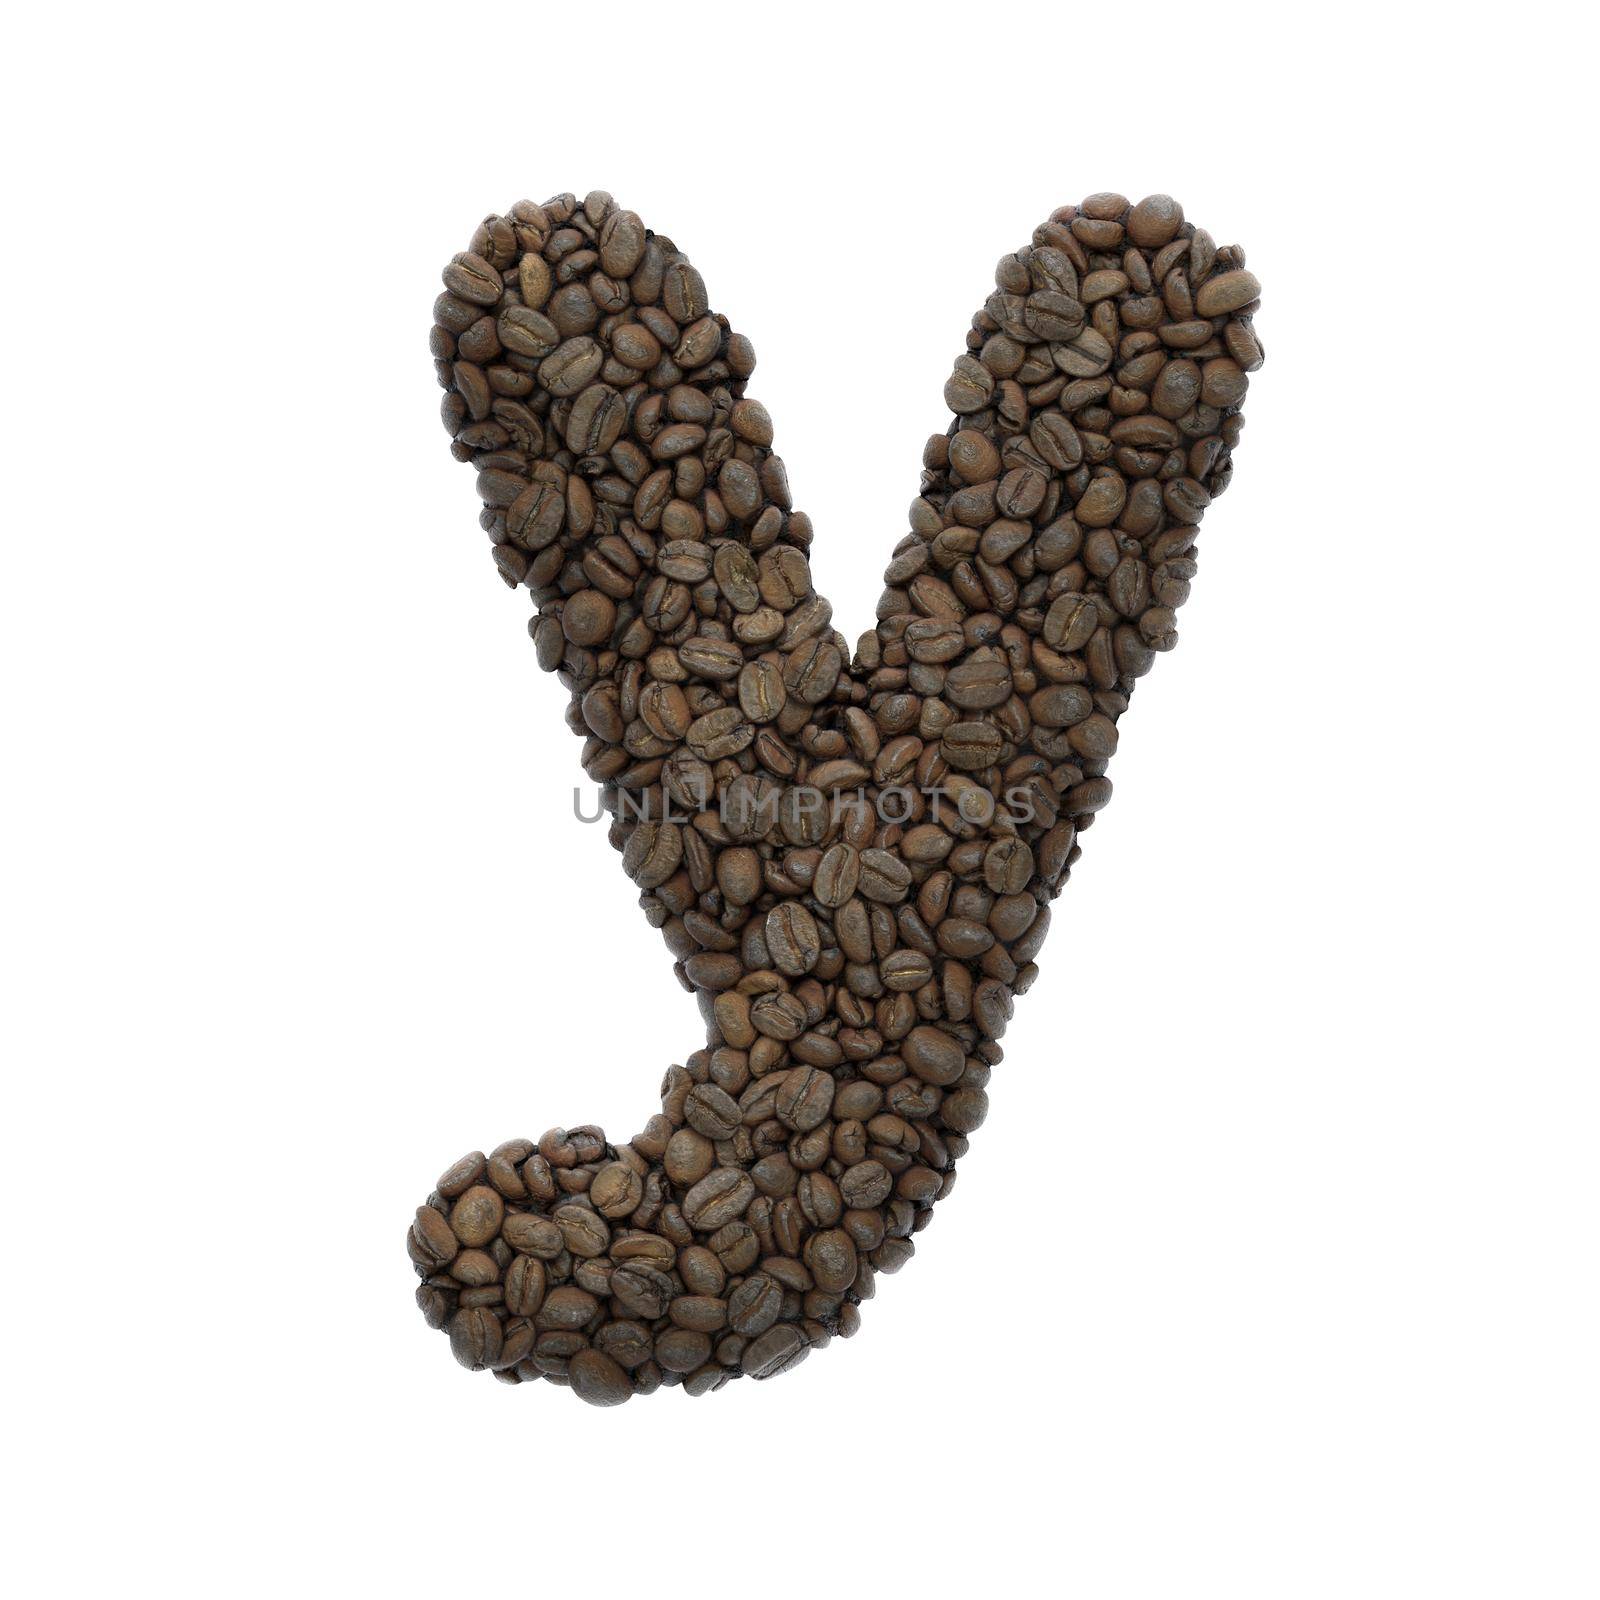 Coffee letter Y - Small 3d roasted beans font - Suitable for Coffee, energy or insomnia related subjects by chrisroll